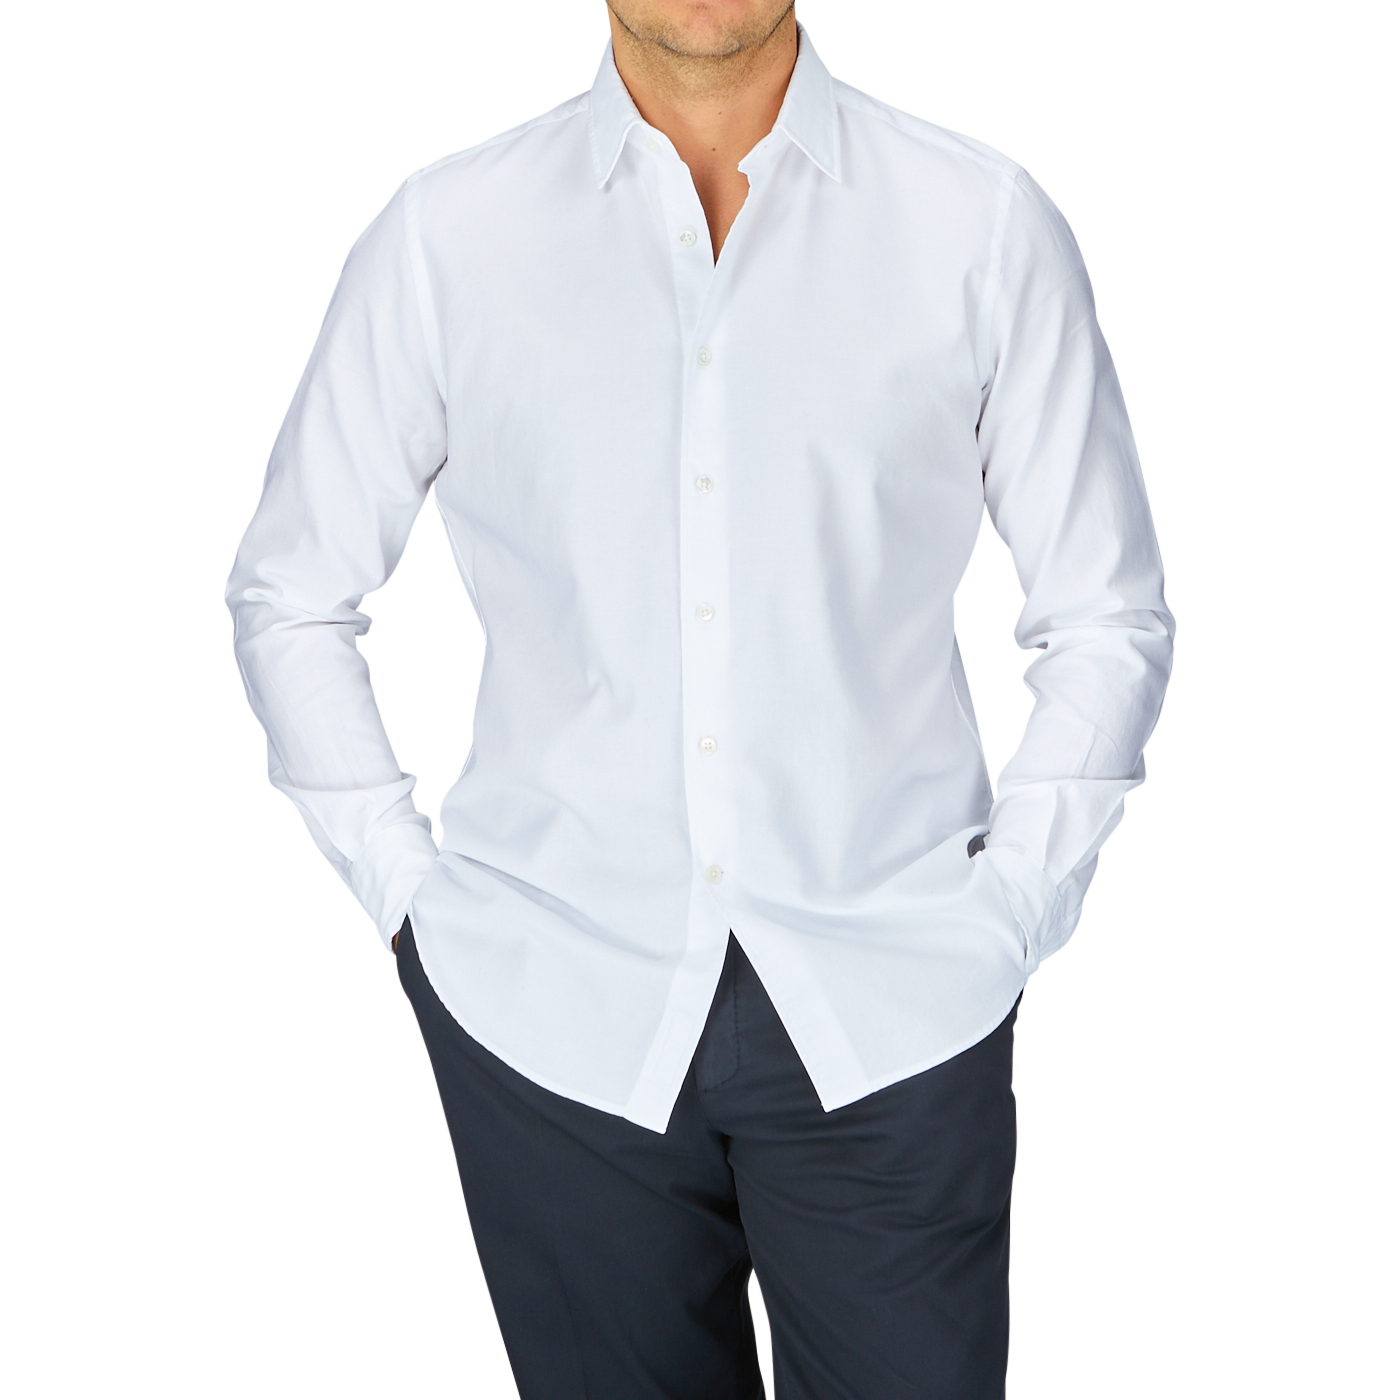 Man wearing a Glanshirt White Cotton Oxford Regular Shirt with mother-of-pearl buttons and dark trousers.